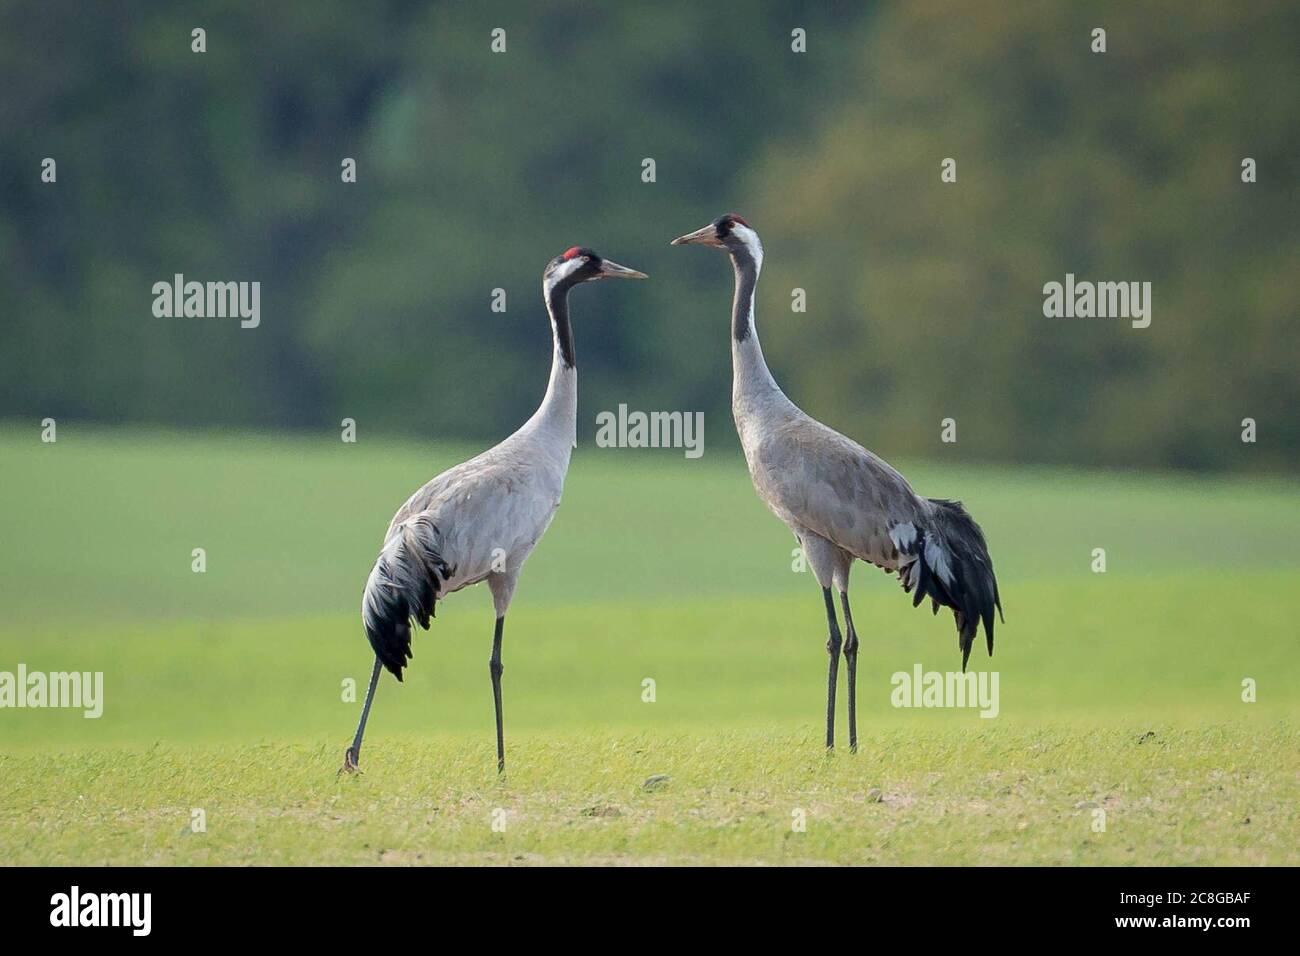 Linum, Germany. 30th Apr, 2018. Two cranes stand opposite each other in the field. Credit: Ingolf König-Jablonski/dpa-Zentralbild/ZB/dpa/Alamy Live News Stock Photo